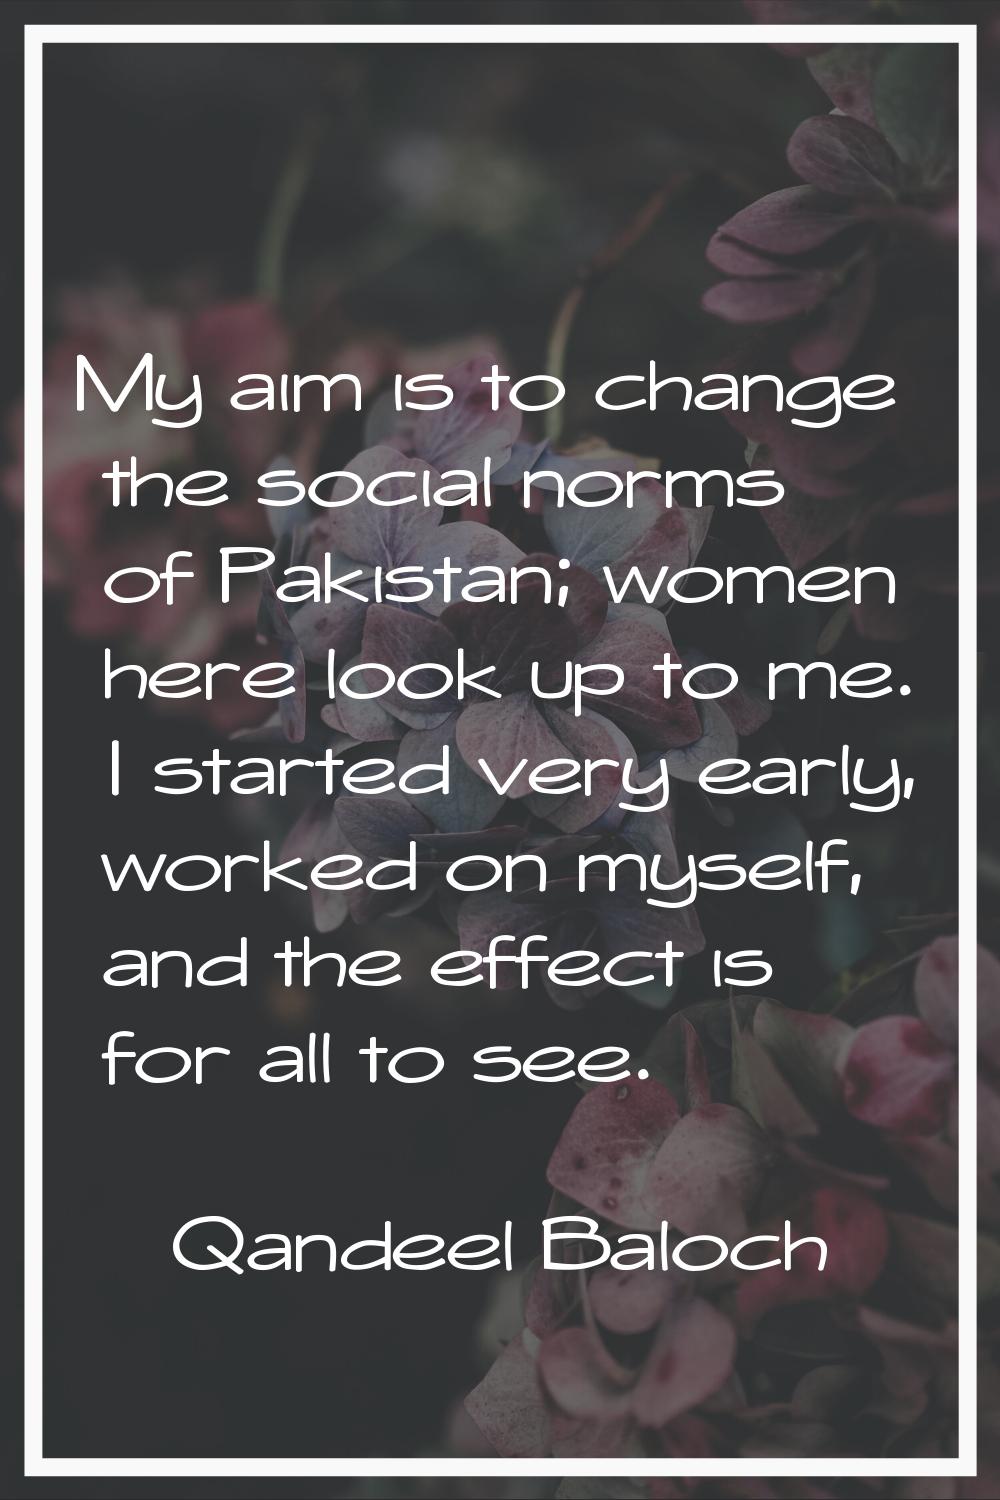 My aim is to change the social norms of Pakistan; women here look up to me. I started very early, w